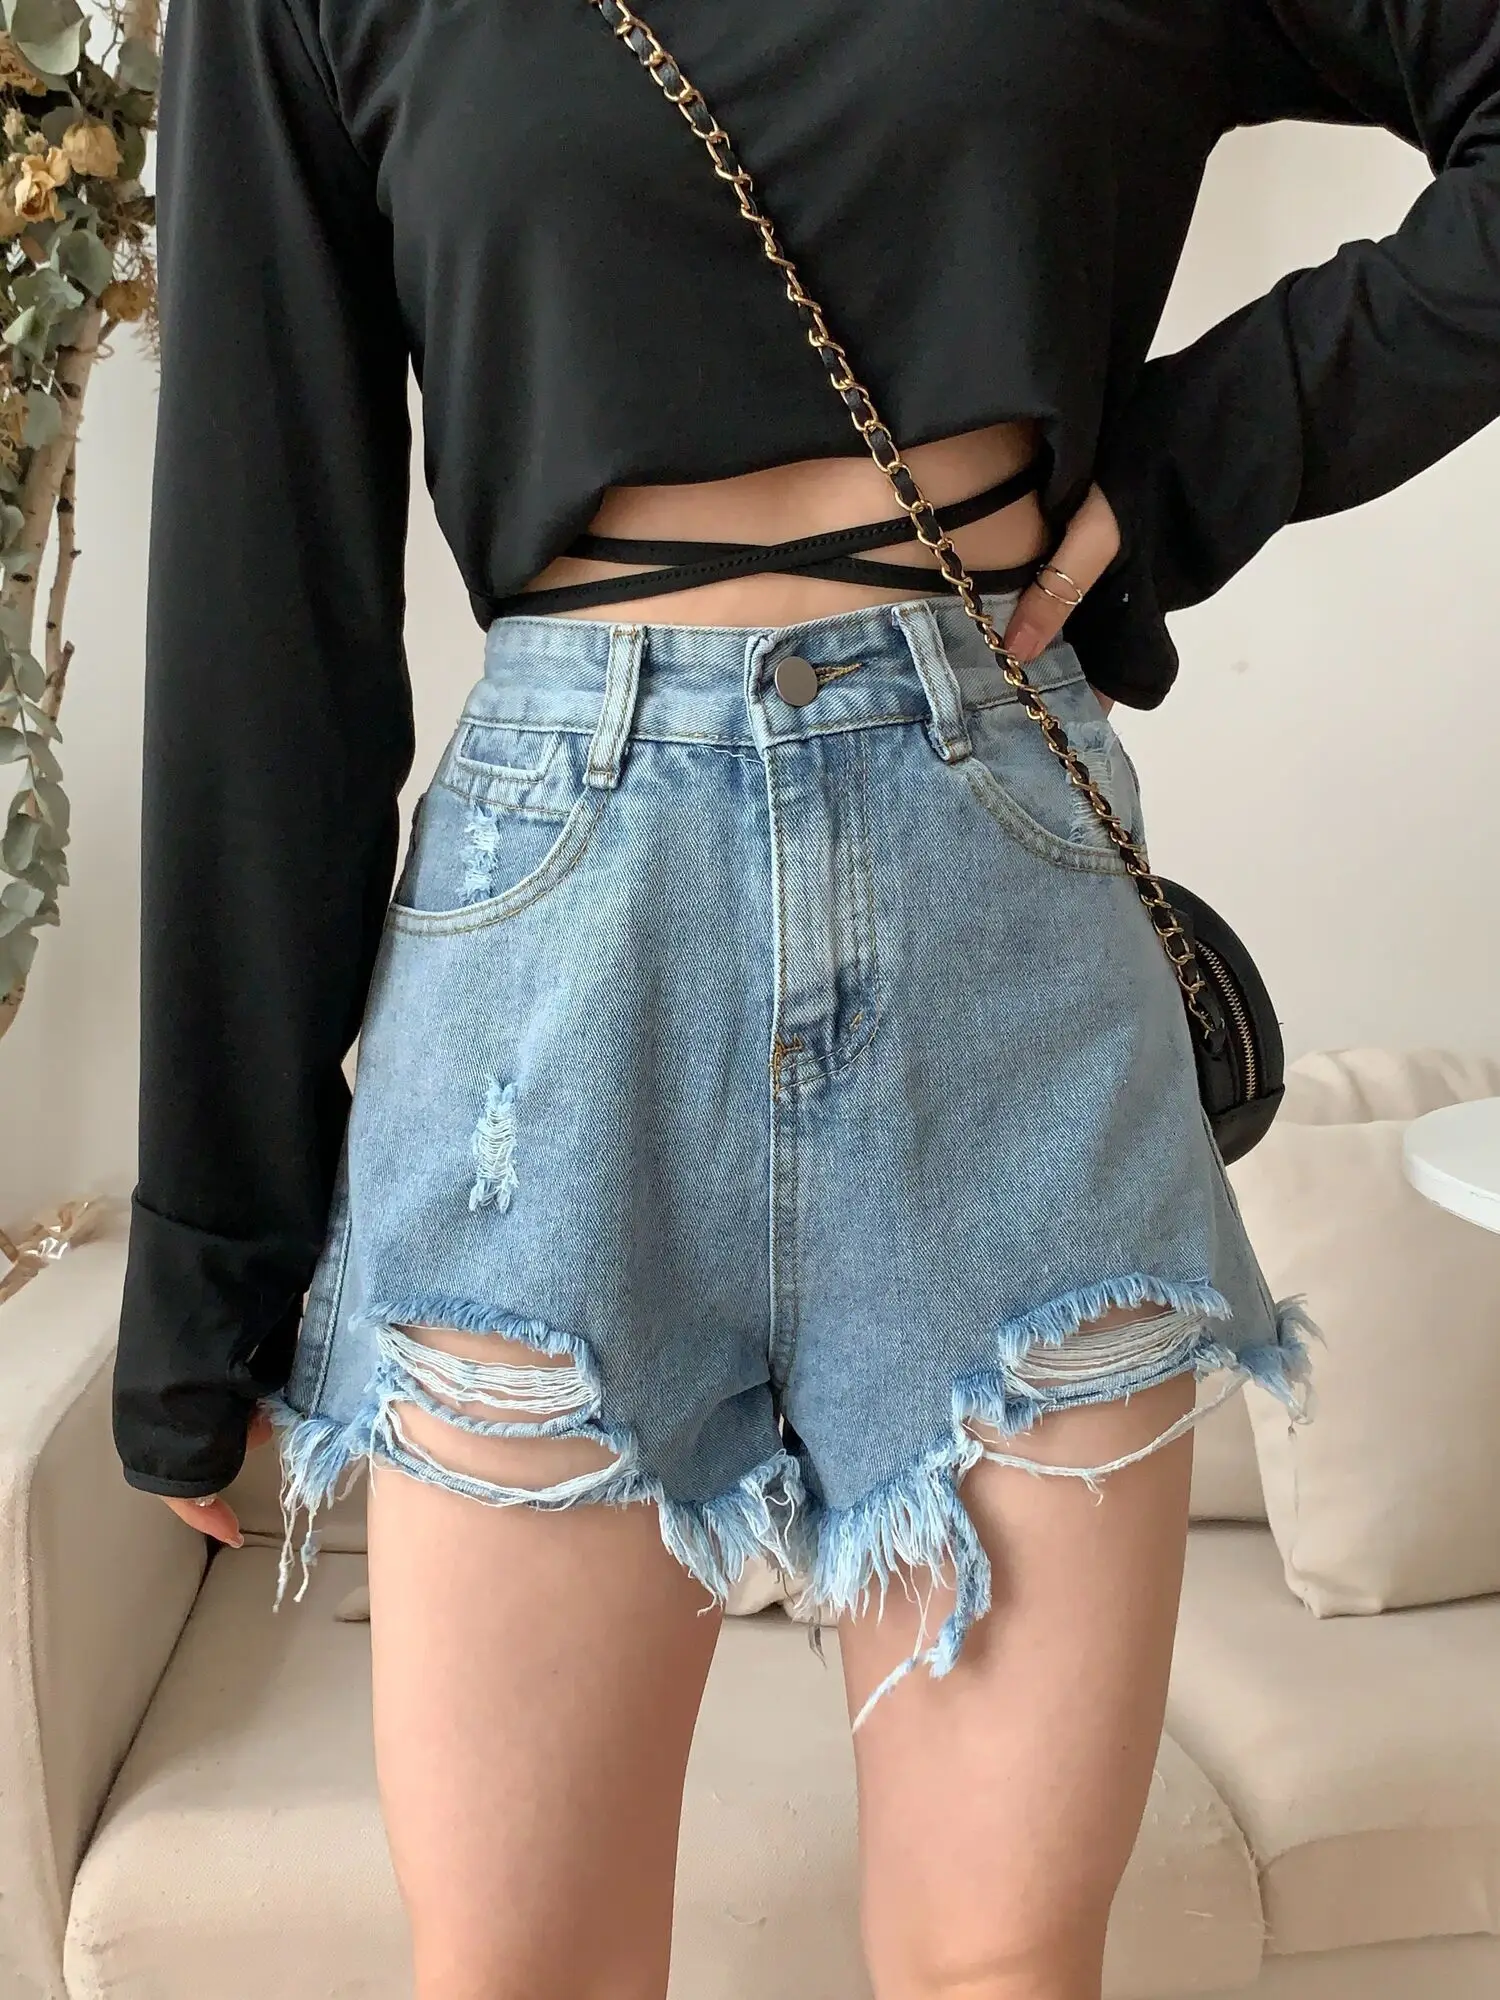 

High Waisted Distressed Denim Shorts For Women's Jeans Shorts Summer New Small And Loose Fit, Slimming A-line Ruffled Edges